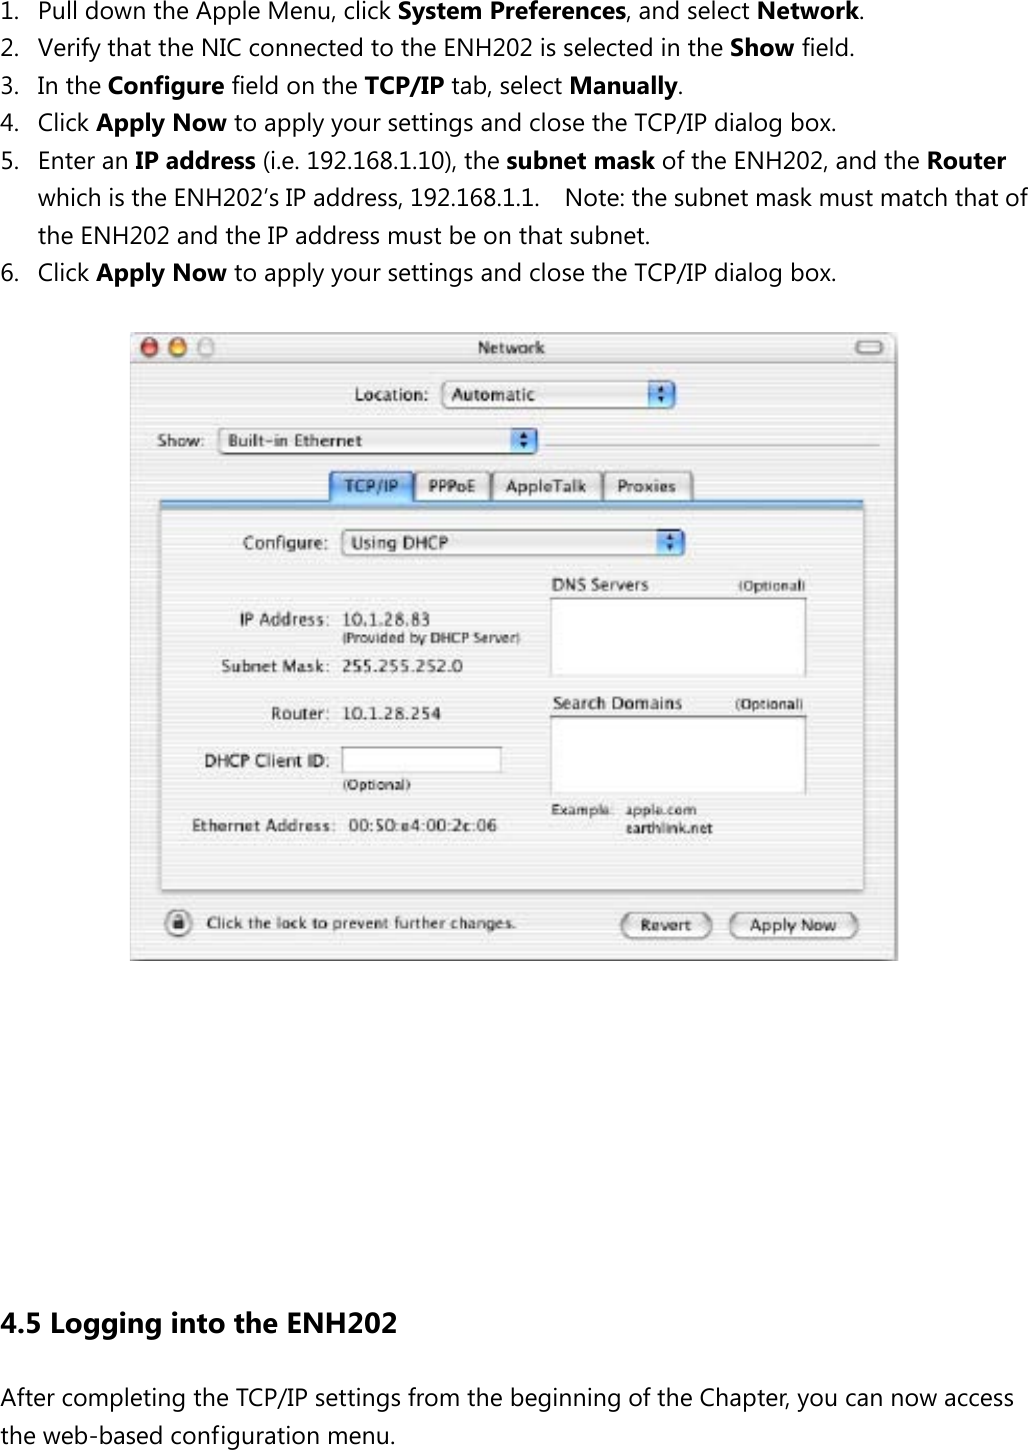  1. Pull down the Apple Menu, click System Preferences, and select Network.   2. Verify that the NIC connected to the ENH202 is selected in the Show field.   3. In the Configure field on the TCP/IP tab, select Manually.   4. Click Apply Now to apply your settings and close the TCP/IP dialog box. 5. Enter an IP address (i.e. 192.168.1.10), the subnet mask of the ENH202, and the Router which is the ENH202’s IP address, 192.168.1.1.    Note: the subnet mask must match that of the ENH202 and the IP address must be on that subnet. 6. Click Apply Now to apply your settings and close the TCP/IP dialog box.           4.5 Logging into the ENH202 After completing the TCP/IP settings from the beginning of the Chapter, you can now access the web-based configuration menu.  